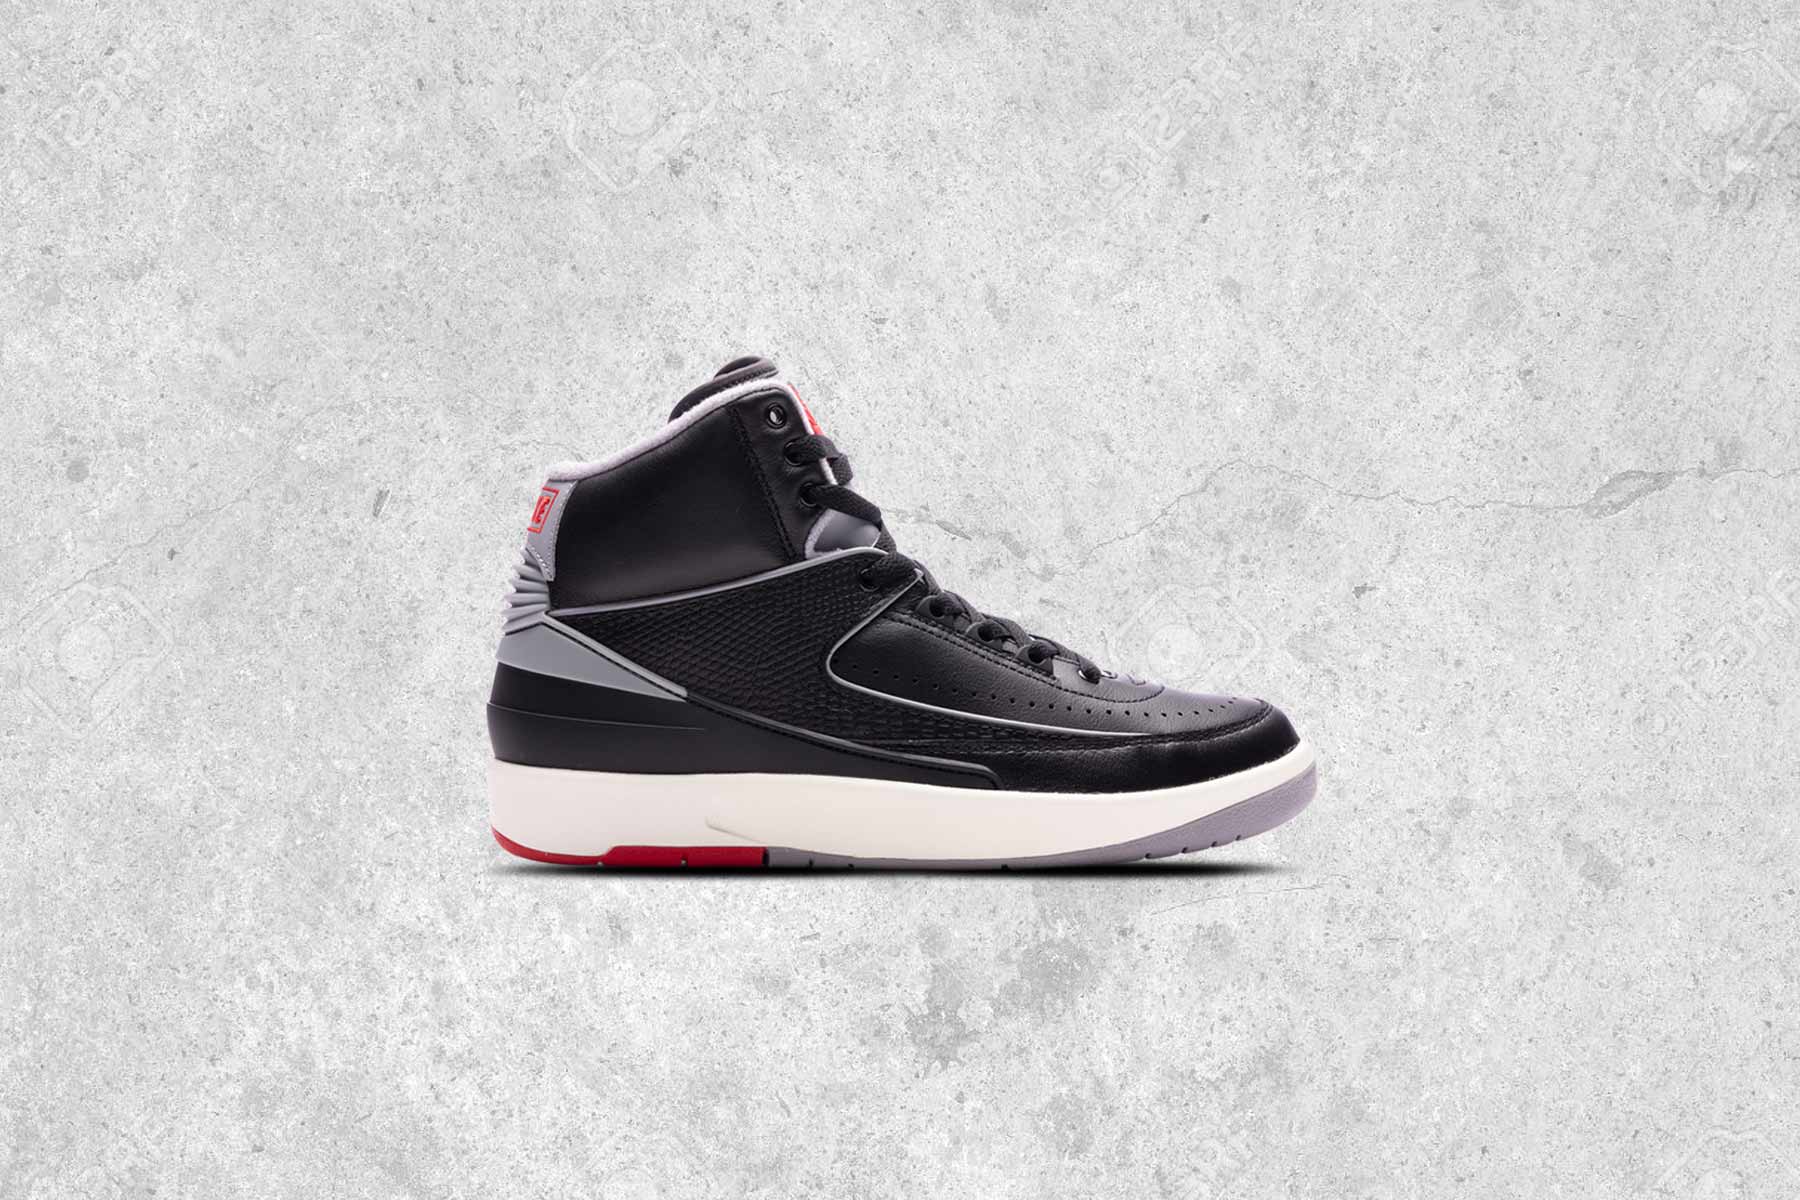 Air Jordan 2 Retro (GS) 'Black Cement' - Black/Cement Grey/Fire Red, , large image number null